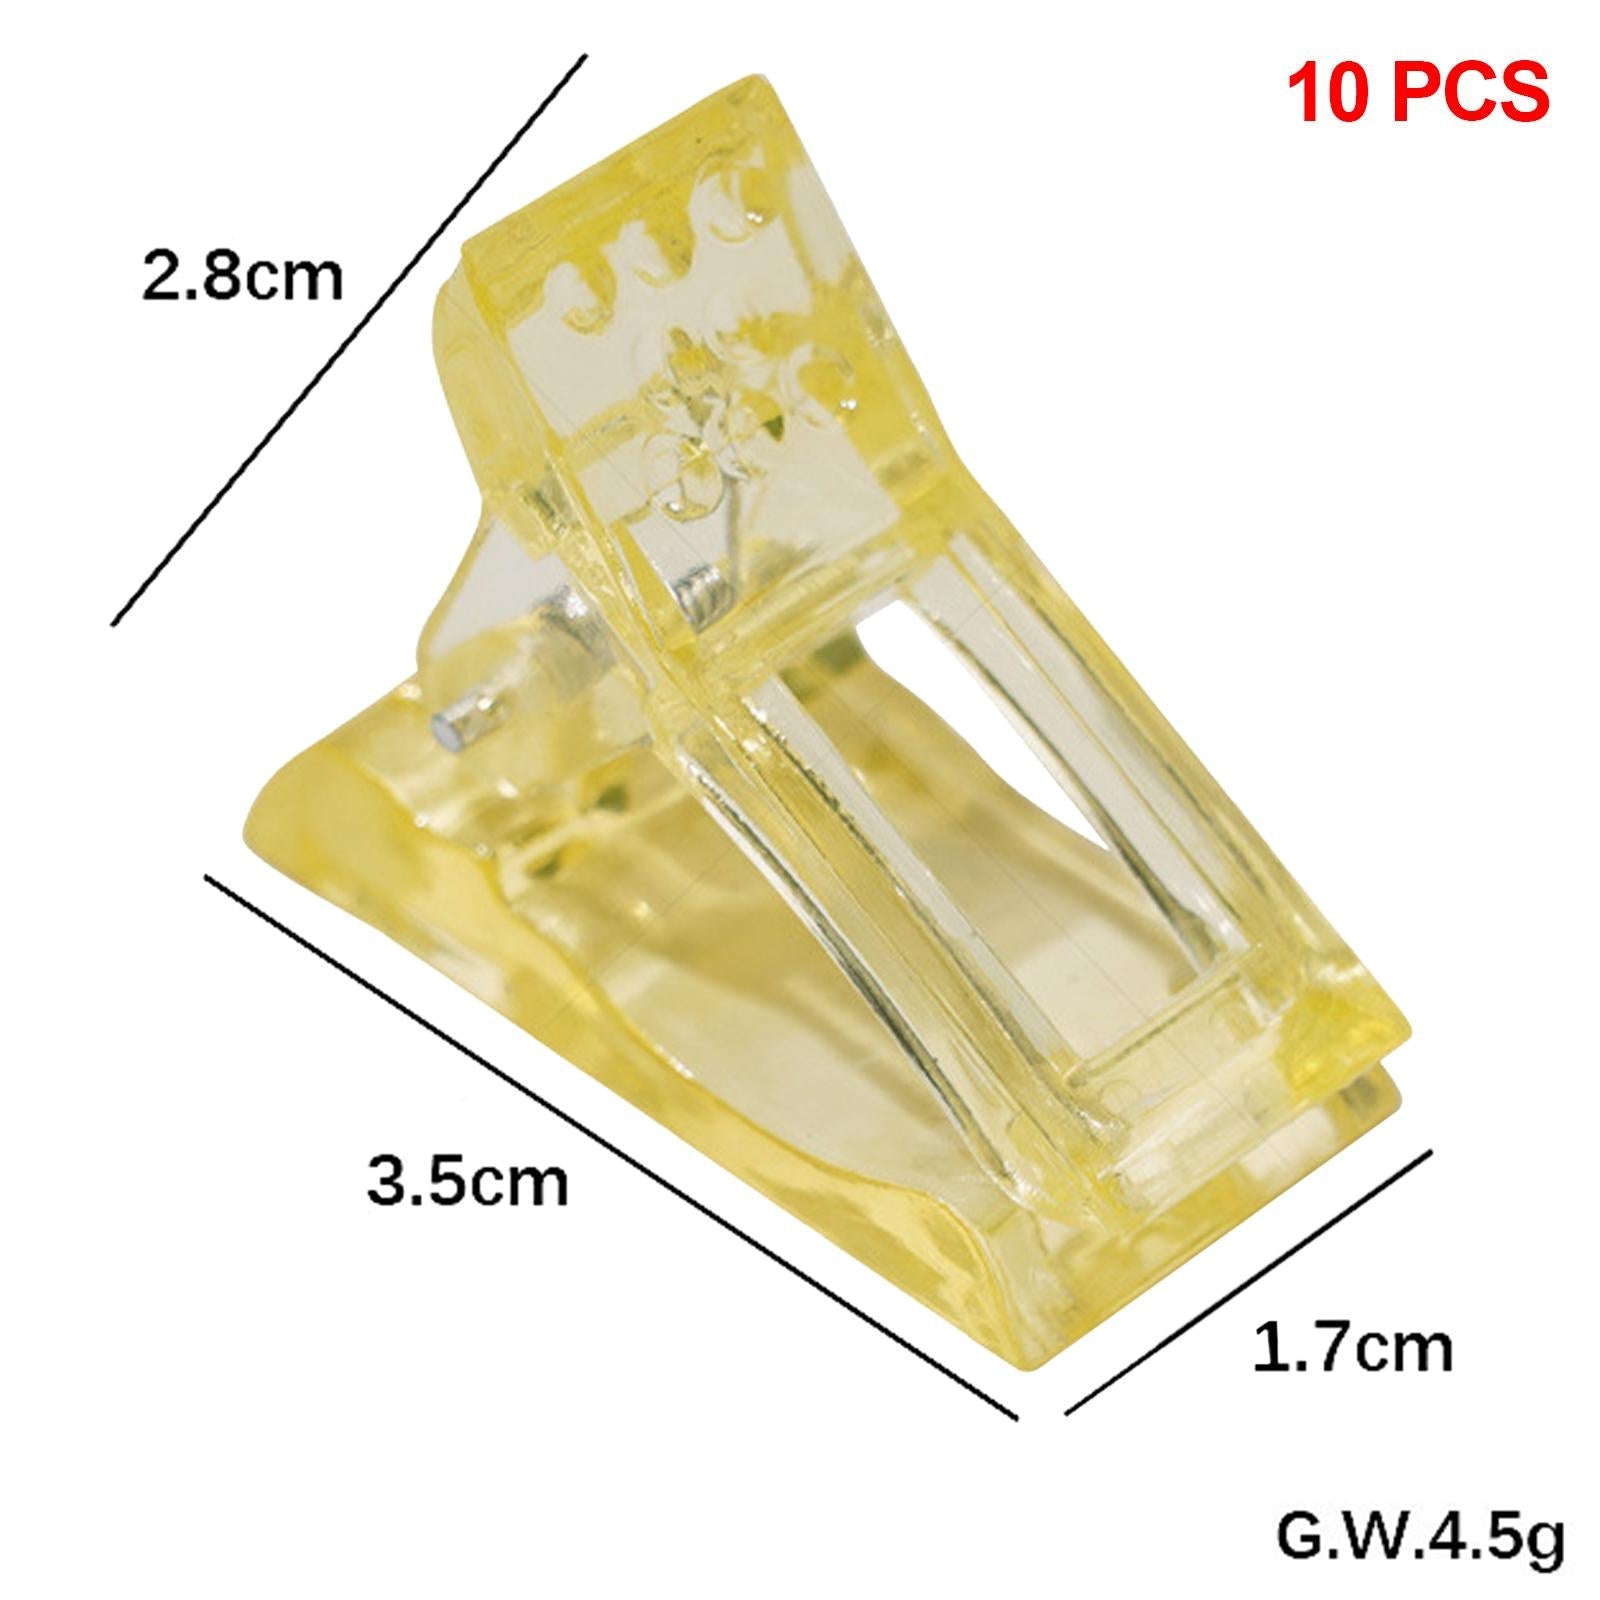 10 Pieces Nails Mold Holder Manicure Nail Clips Shaping Clip Salon Yellow